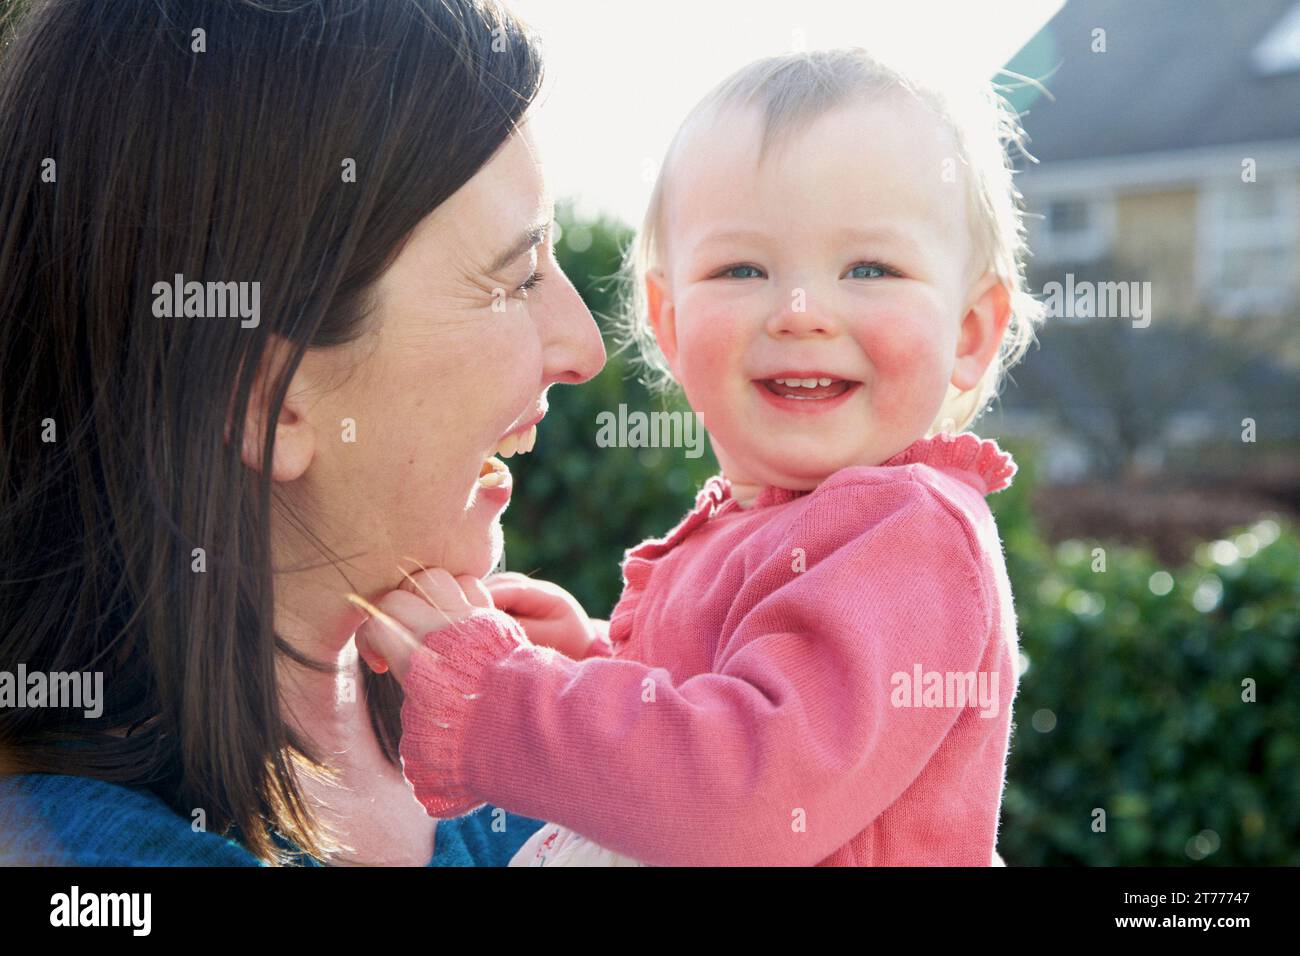 Mother Holding Baby Girl Outdoors Banque D'Images